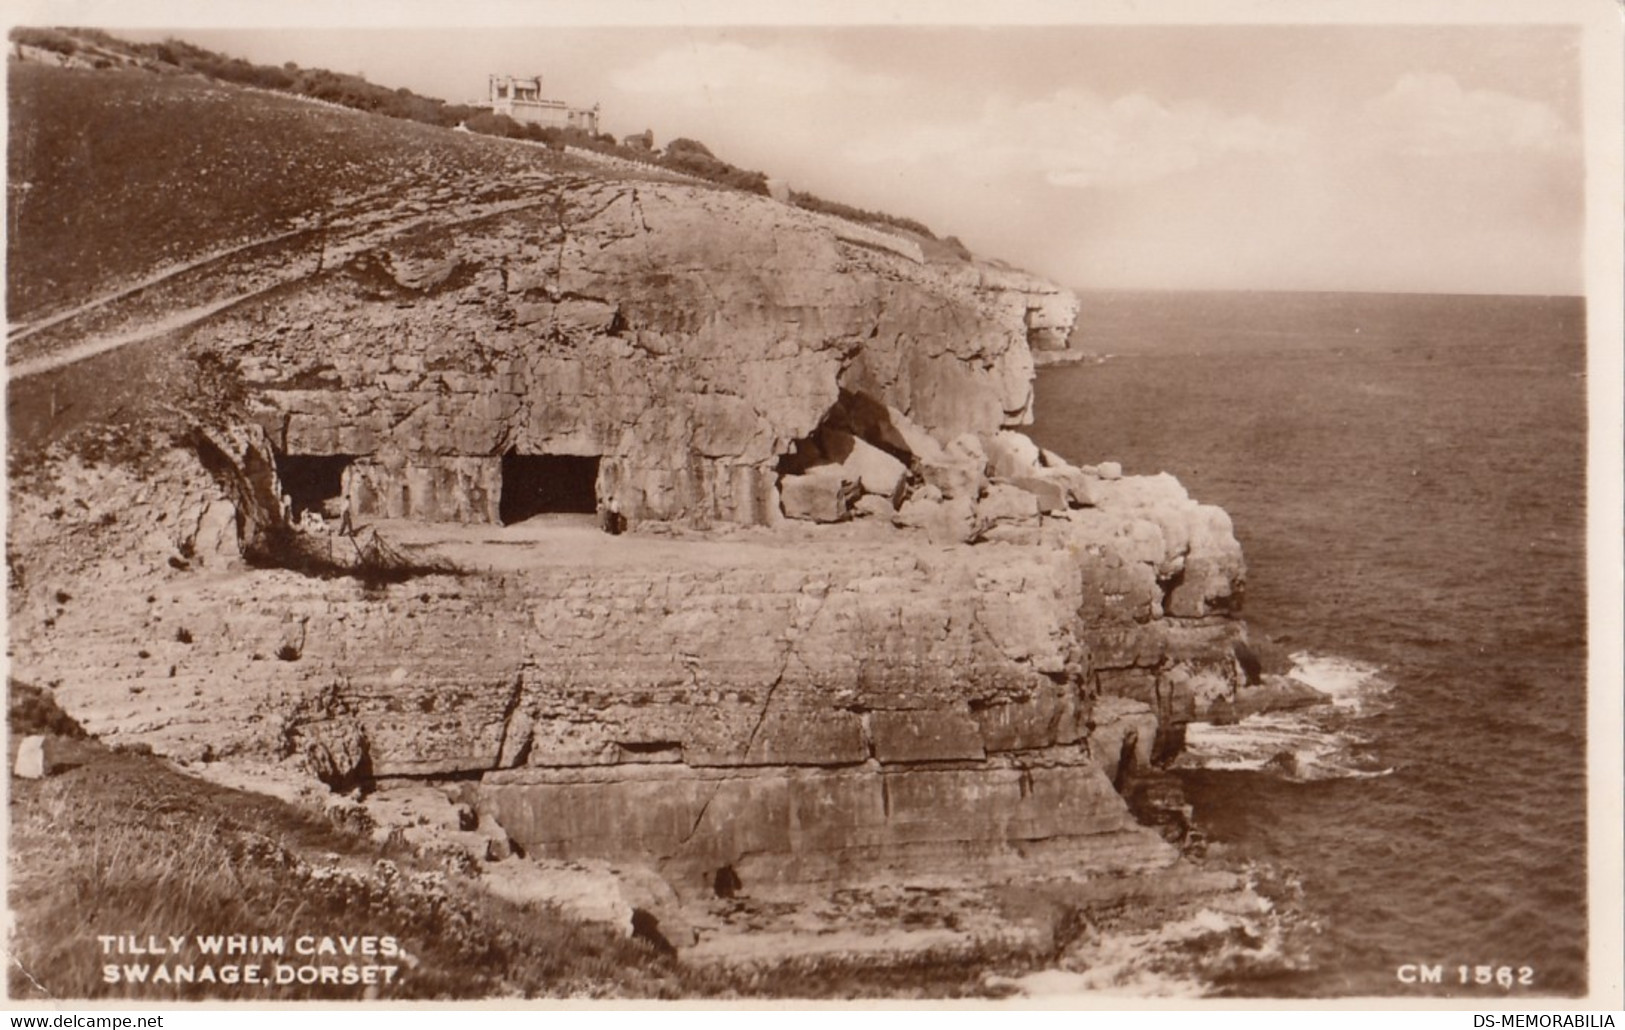 Swanage Dorset - Tilly Whim Caves - Swanage